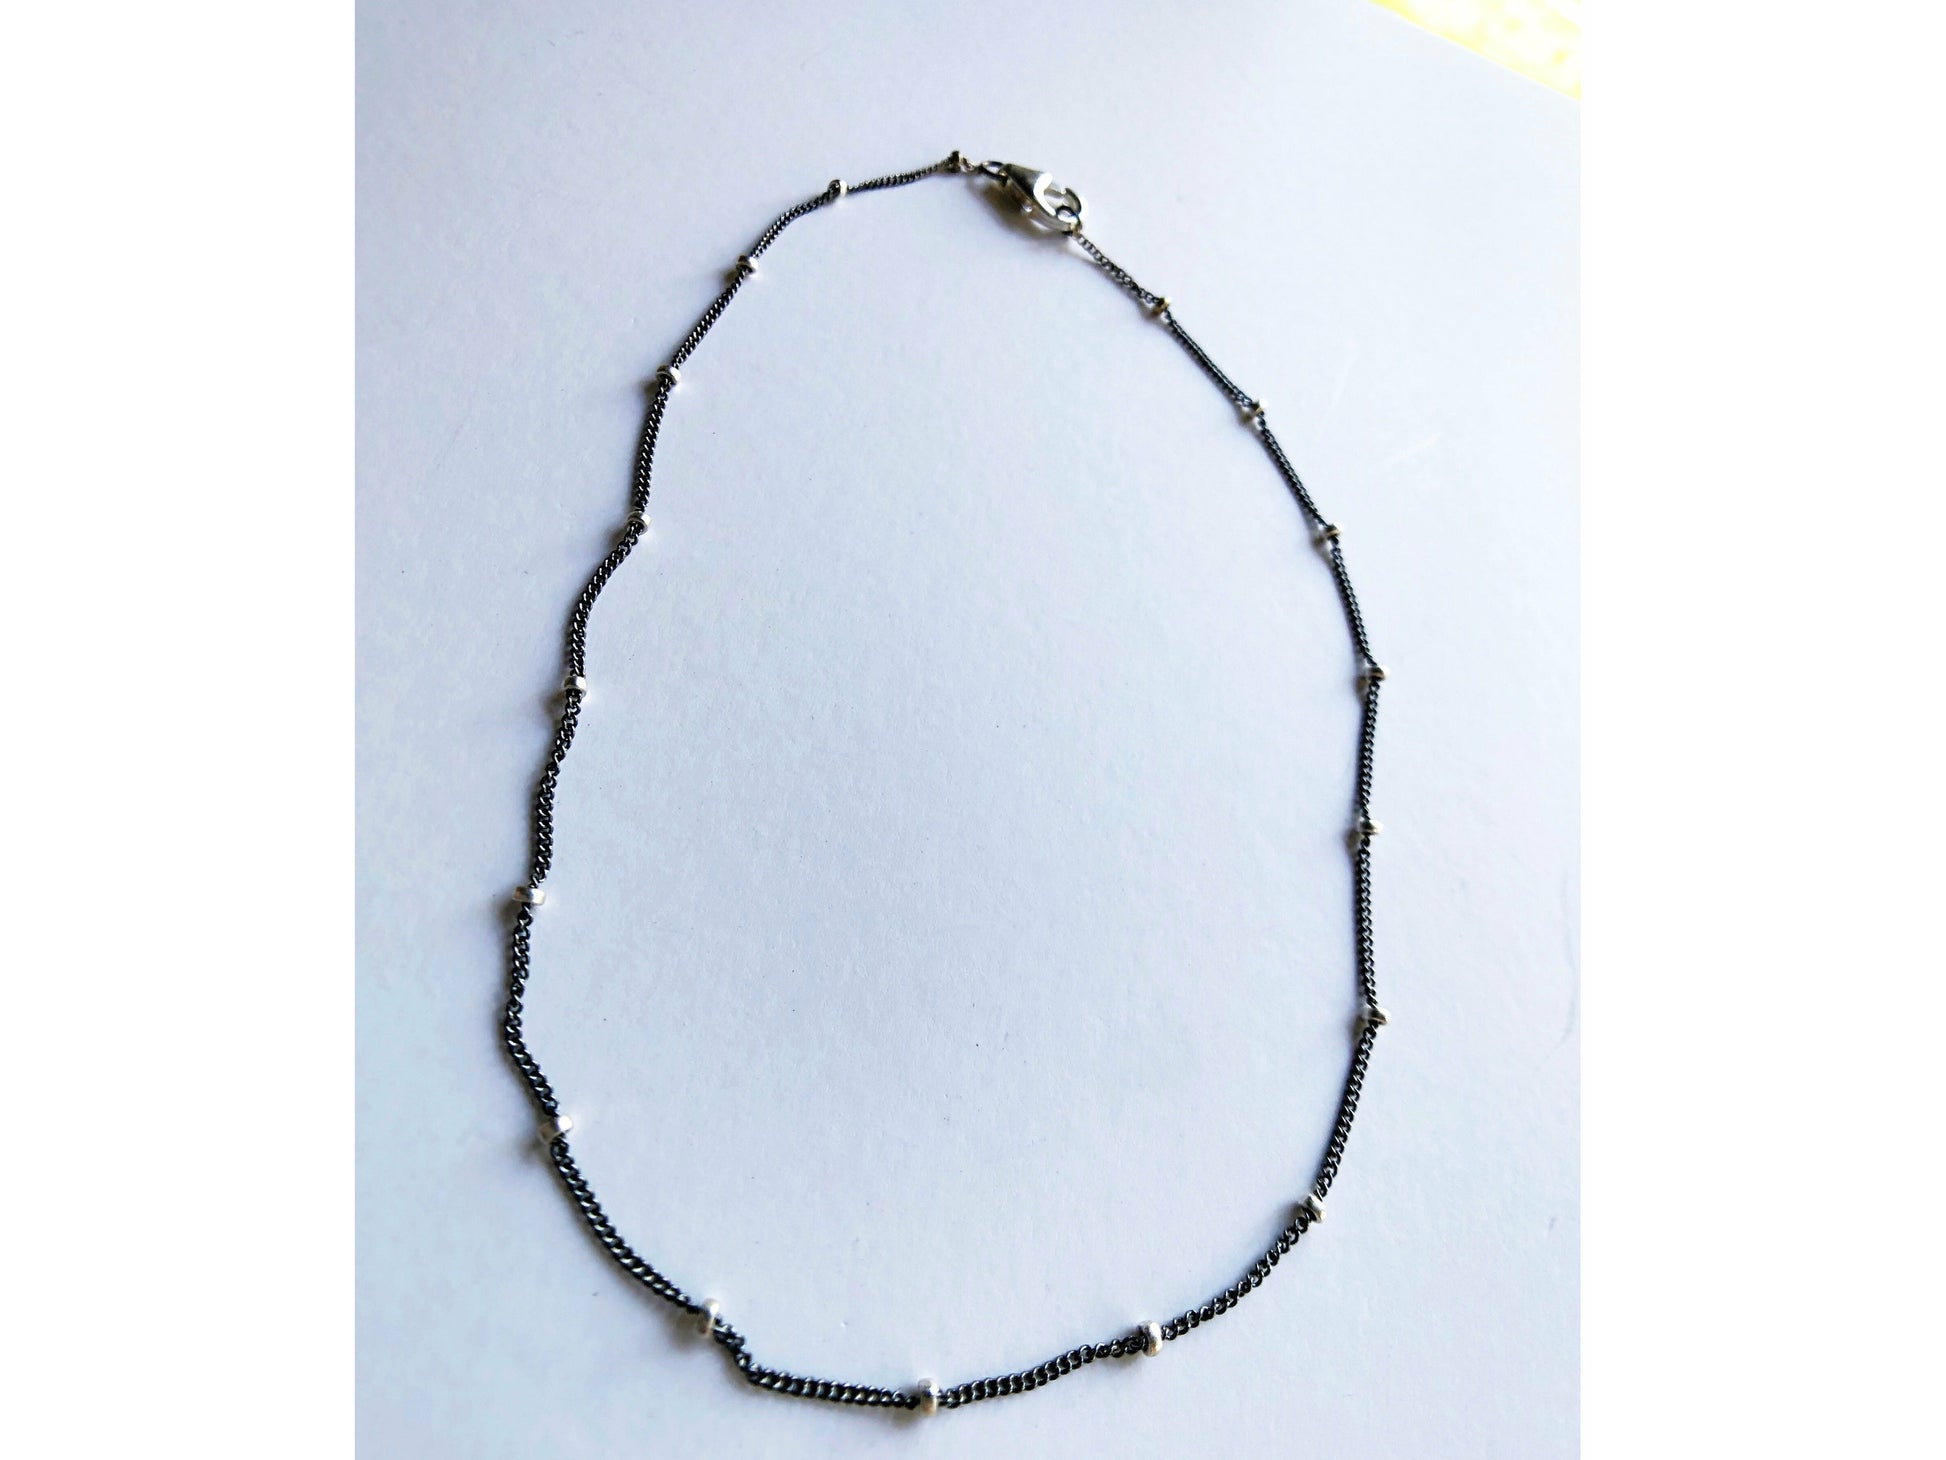 Small black bracelet with dots of silver.